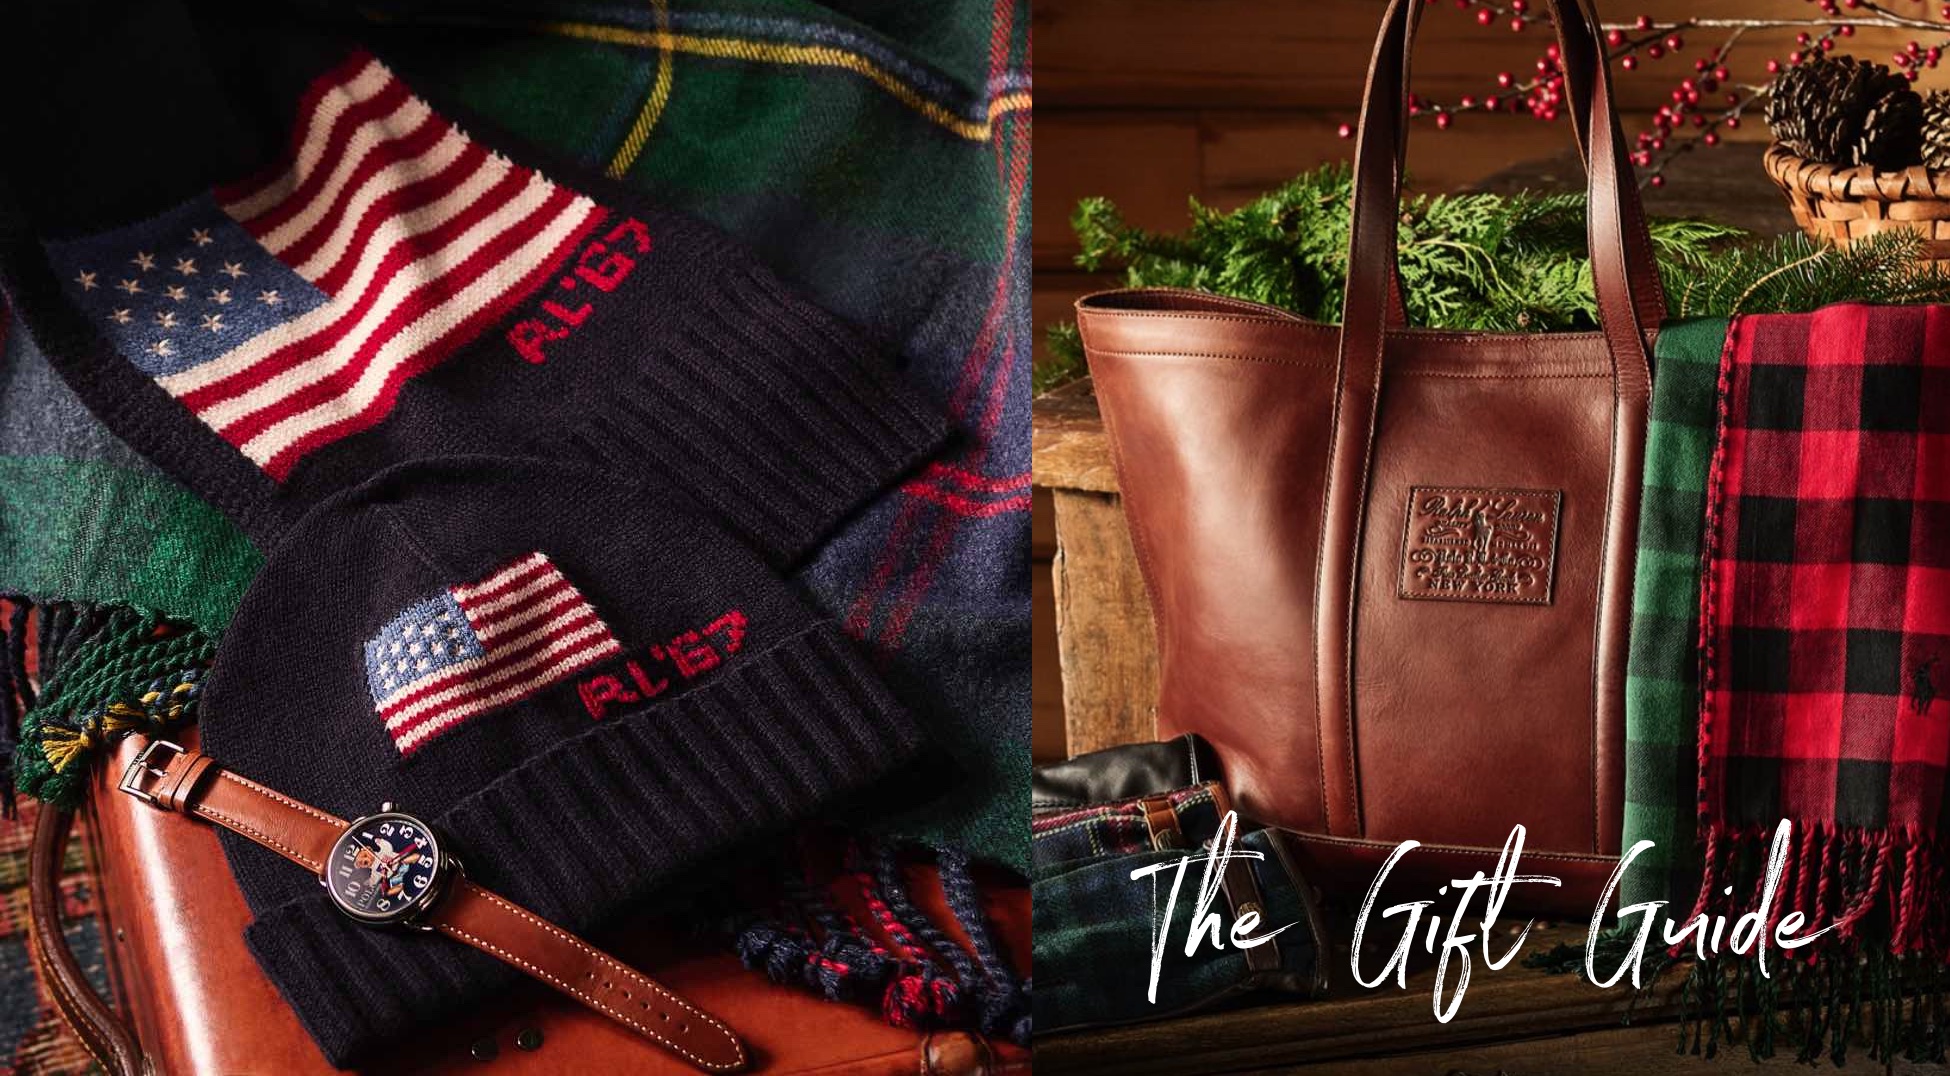 The Ralph Lauren Holiday Gift Guide is here with classic ideas - 9to5Toys